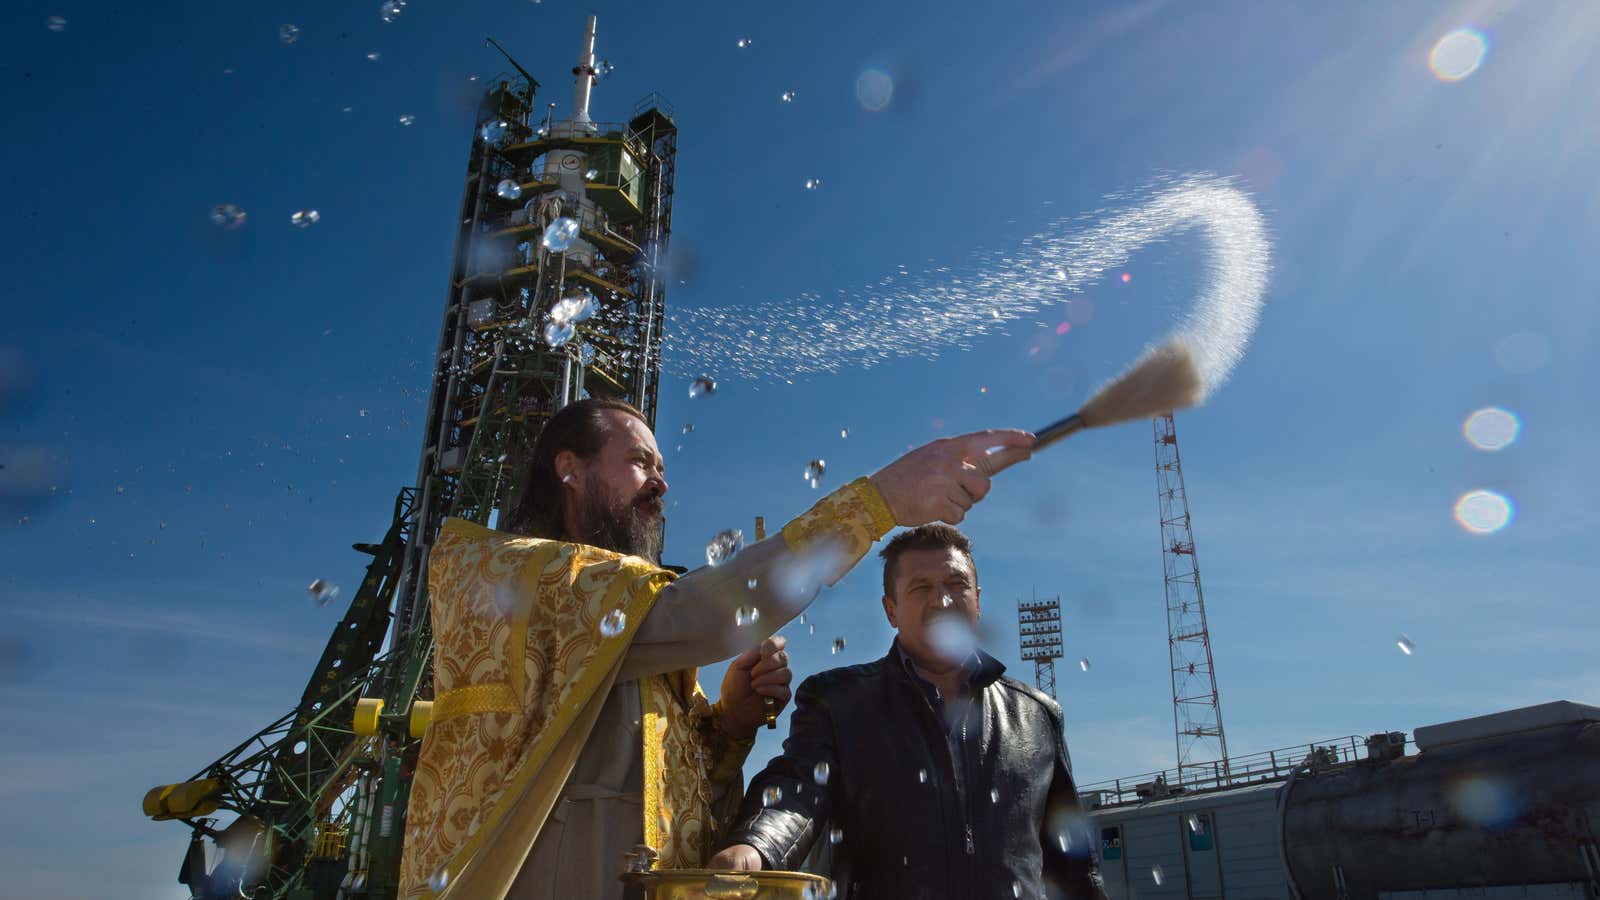 No cosmonaut, nor space vehicle, travels to space without the Russian Orthodox church’s blessing.